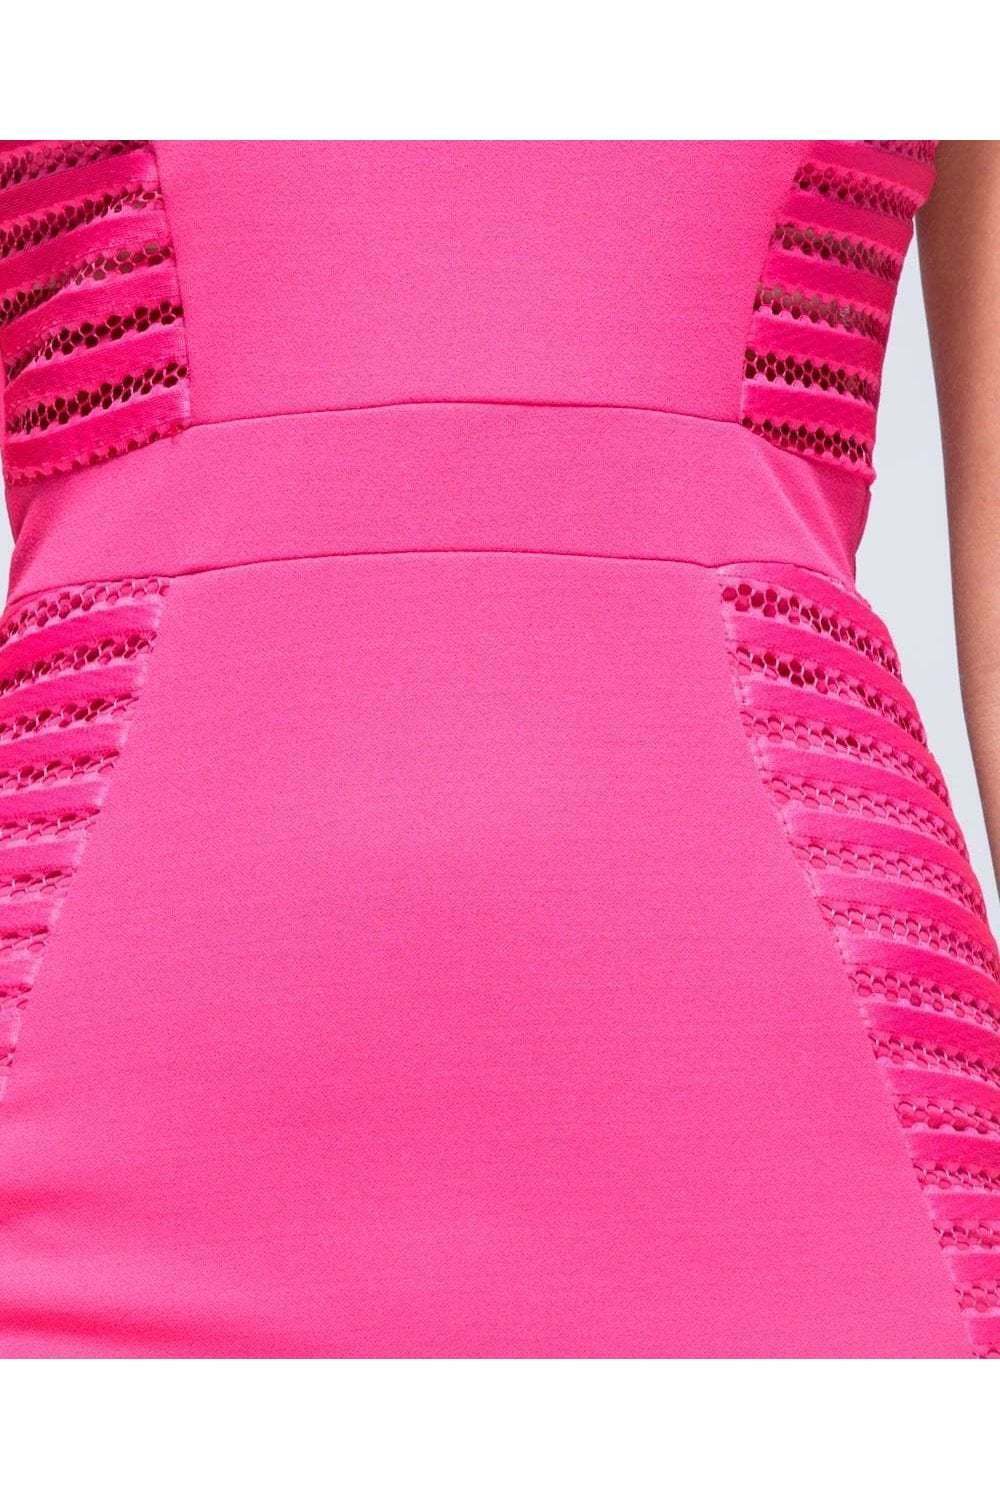 Off Shoulder Lace Panel Bardot Bodycon Dress in Pink Close Up View